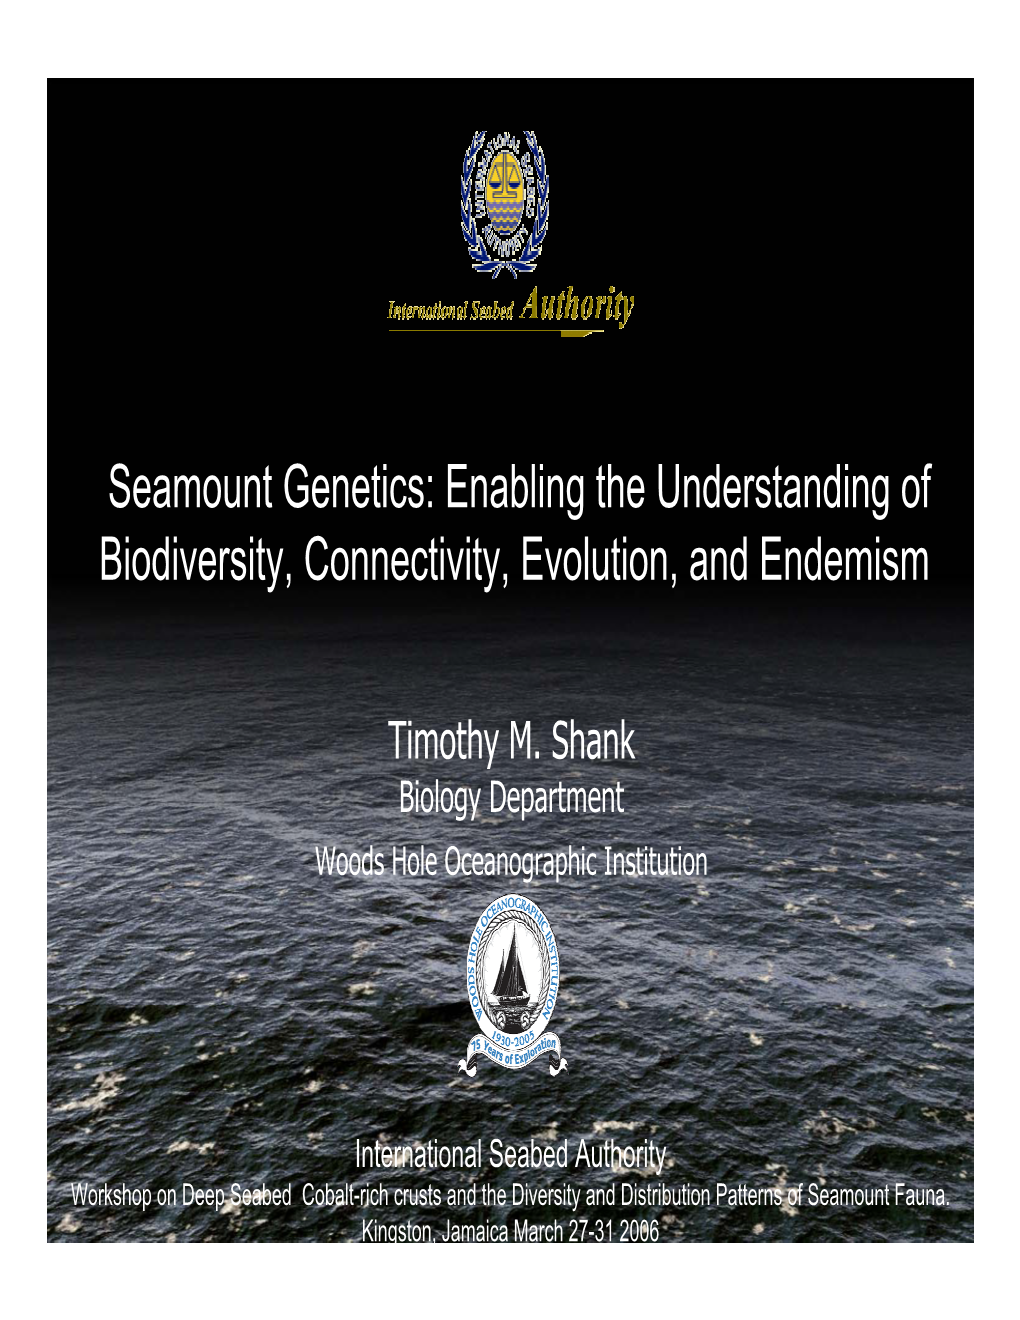 Seamount Genetics: Enabling the Understanding of Biodiversity, Connectivity, Evolution, and Endemism